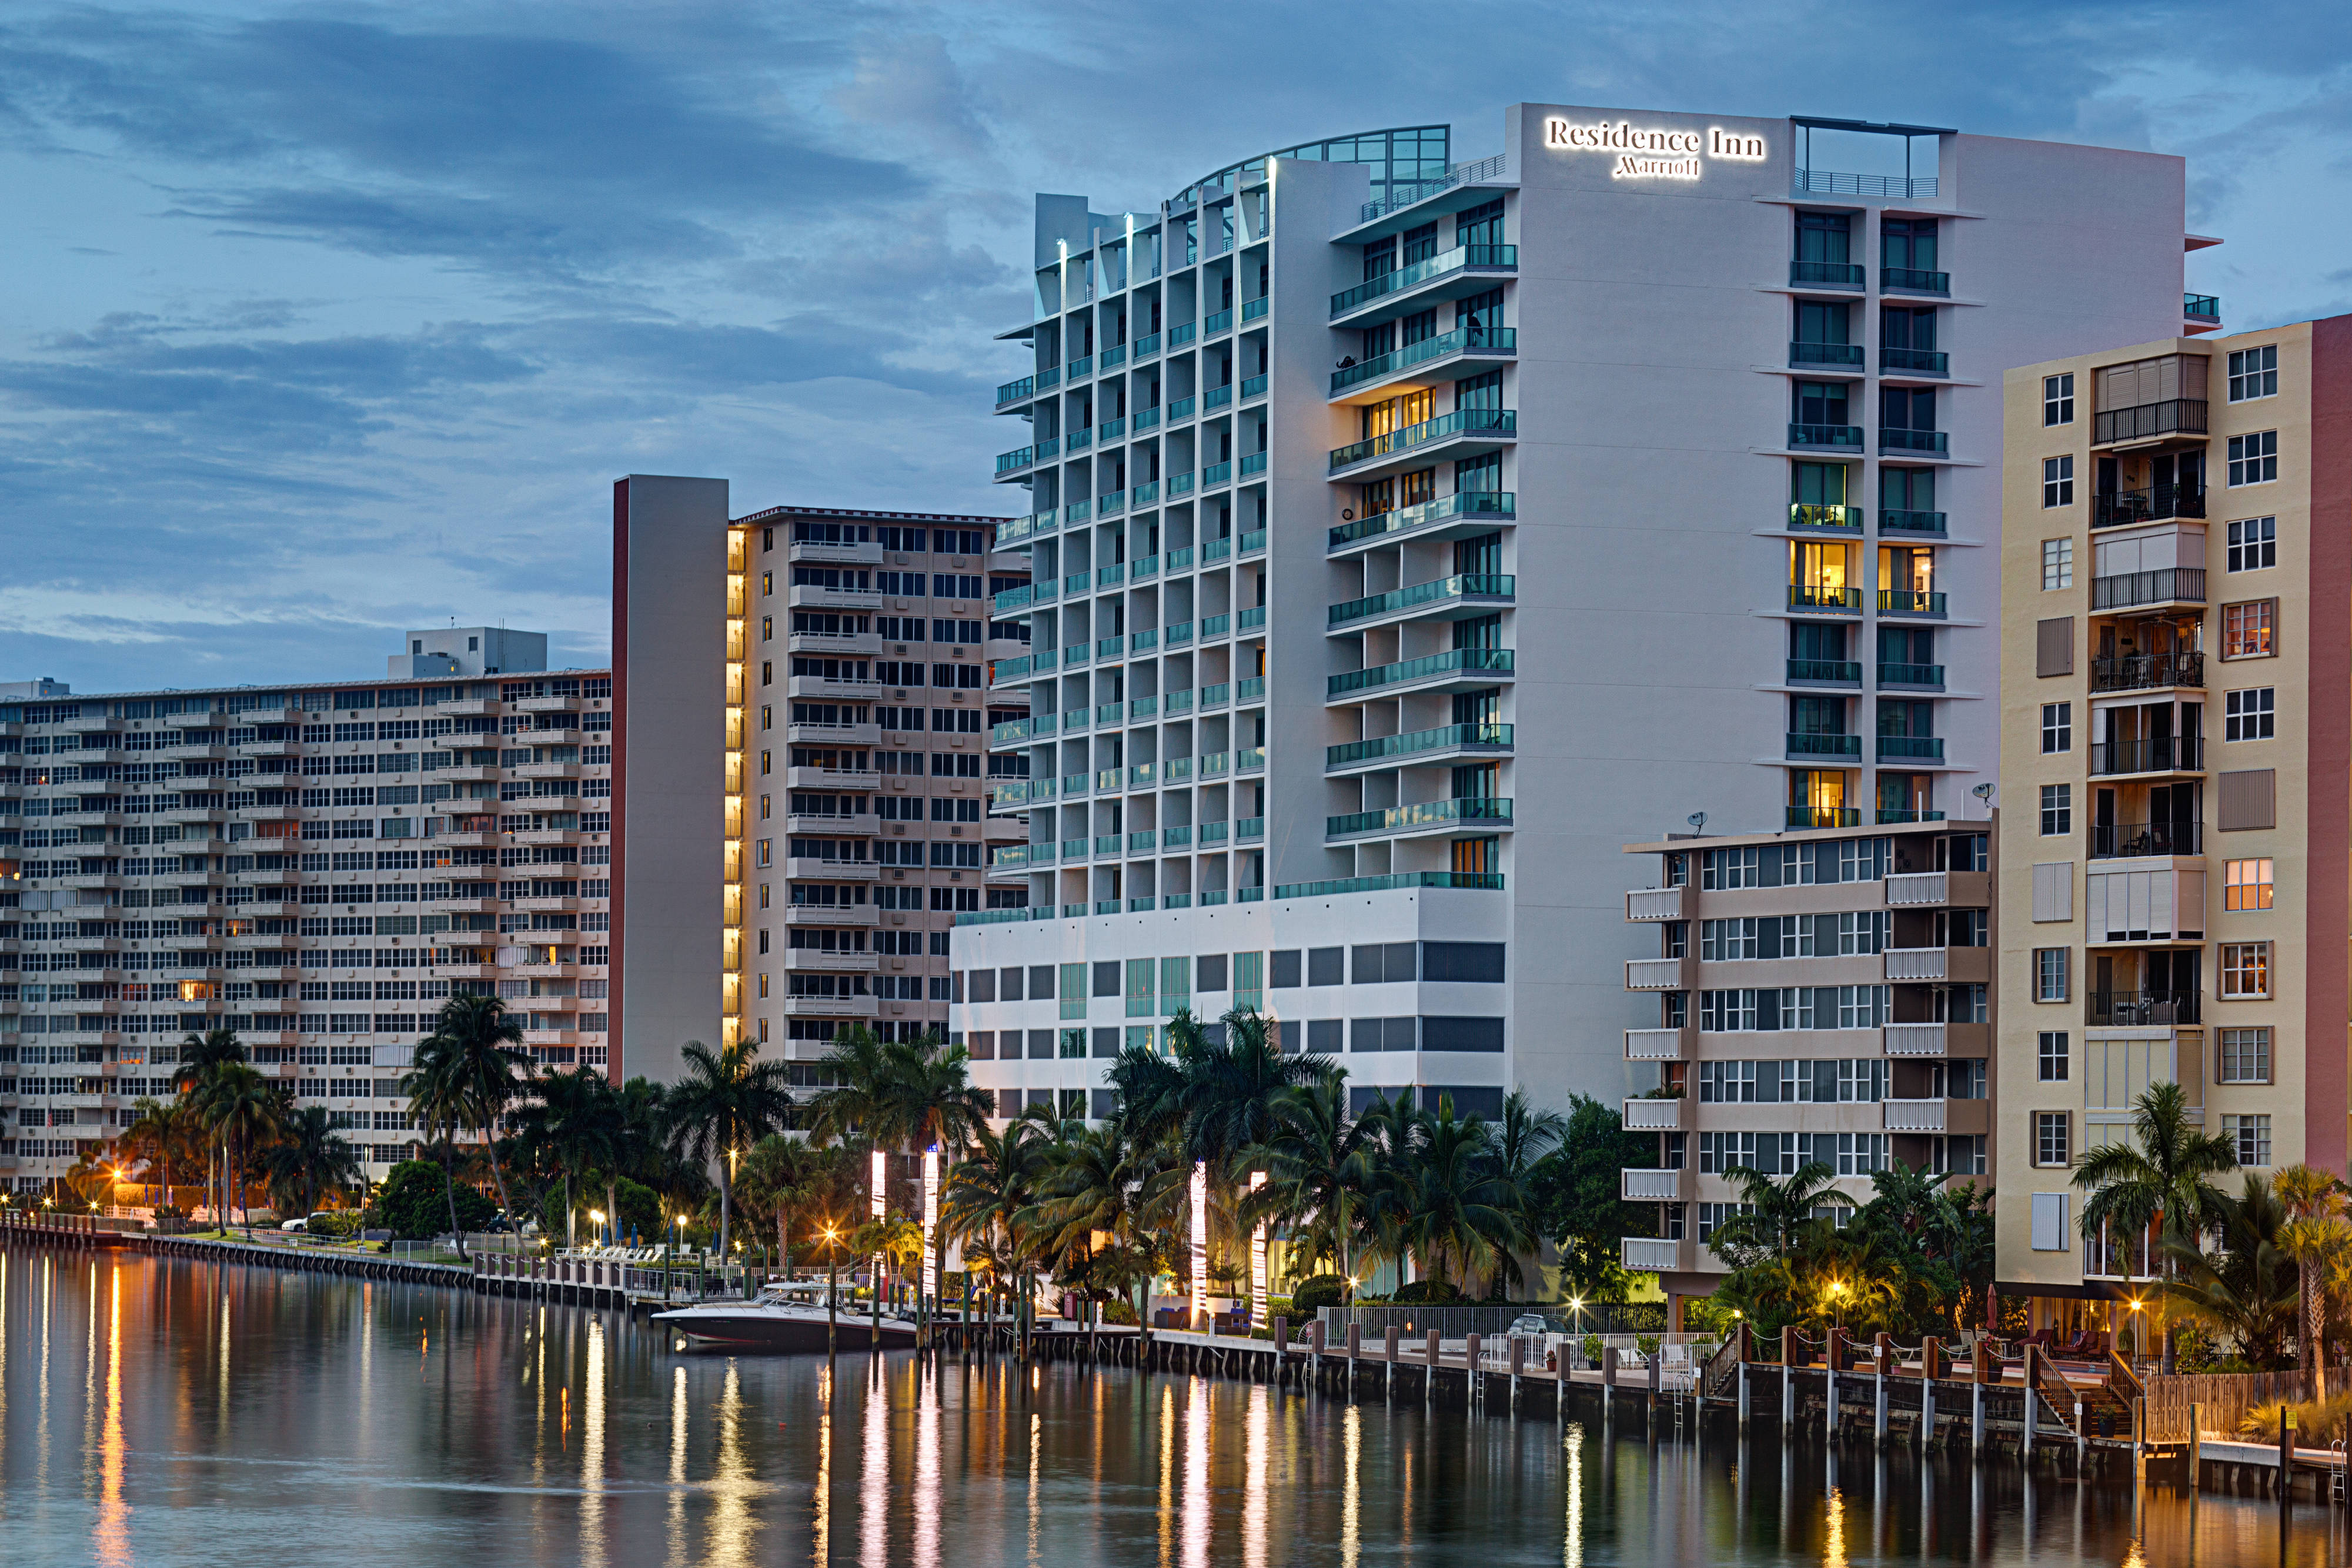 Photo of Residence Inn by Marriott Fort Lauderdale Intracoastal/Il Lugano, Fort Lauderdale, FL